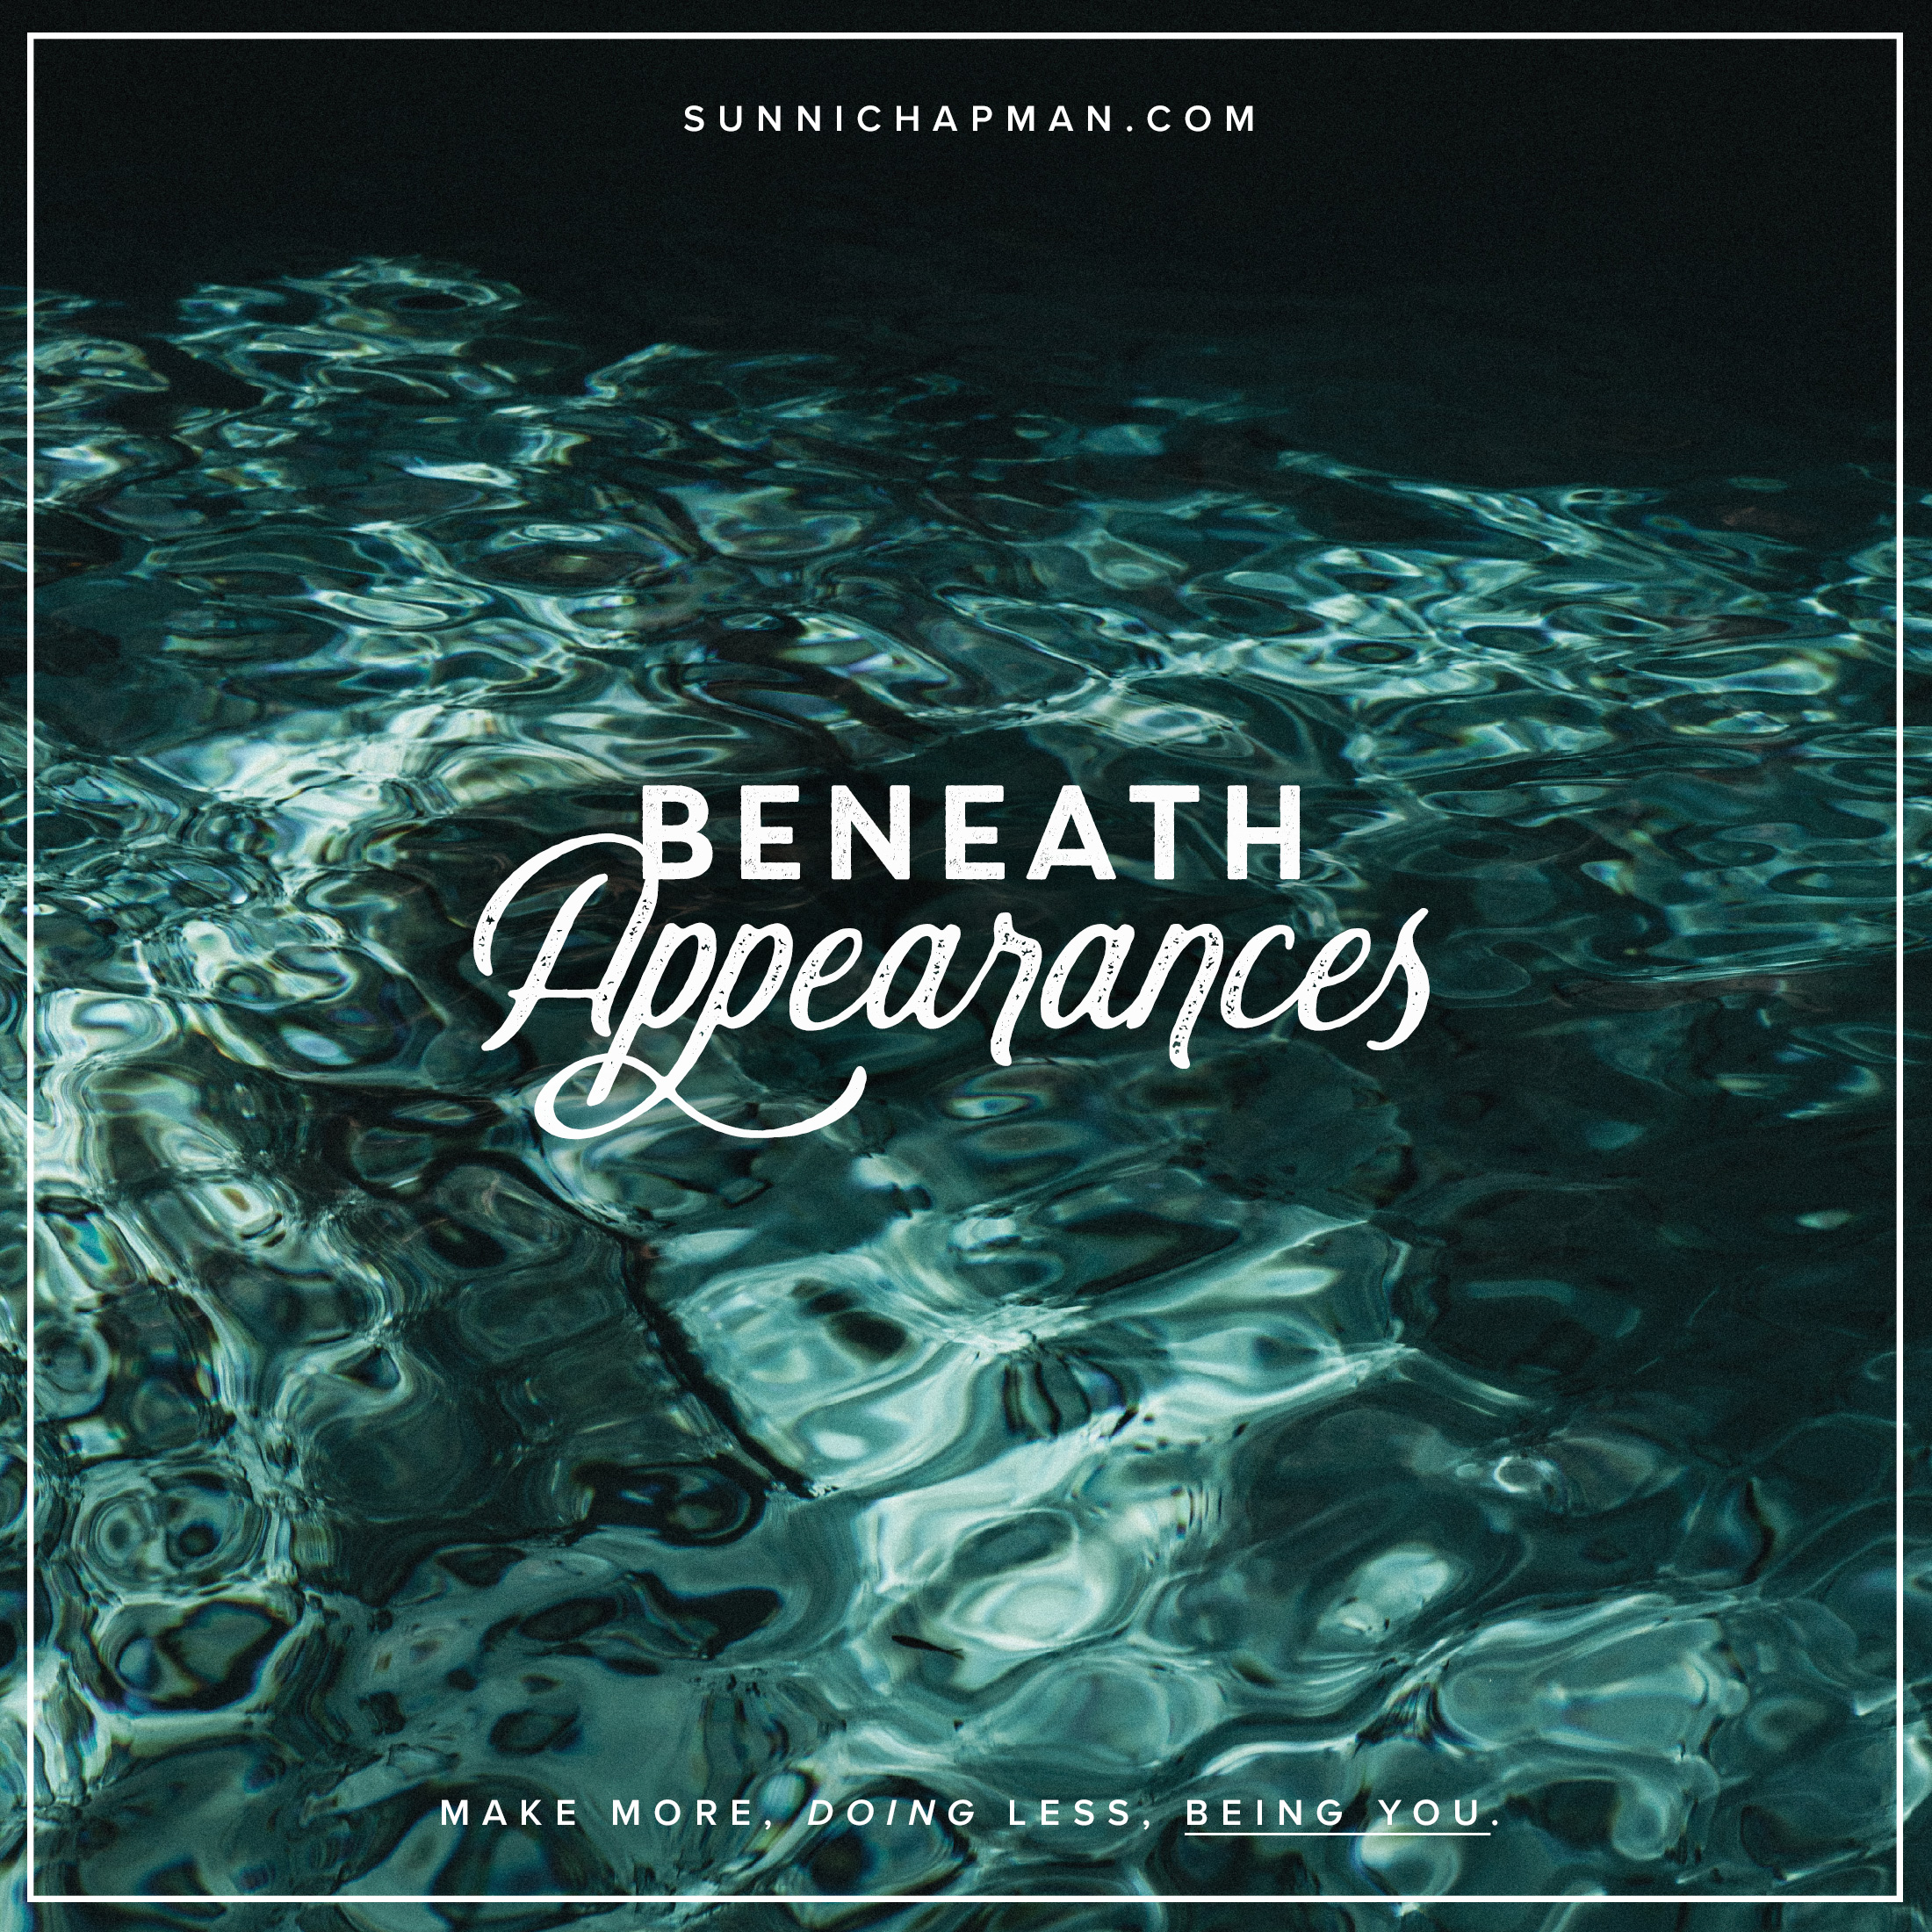 Water in the background (green/blue, ocean) and text over it: Beneath Appearances